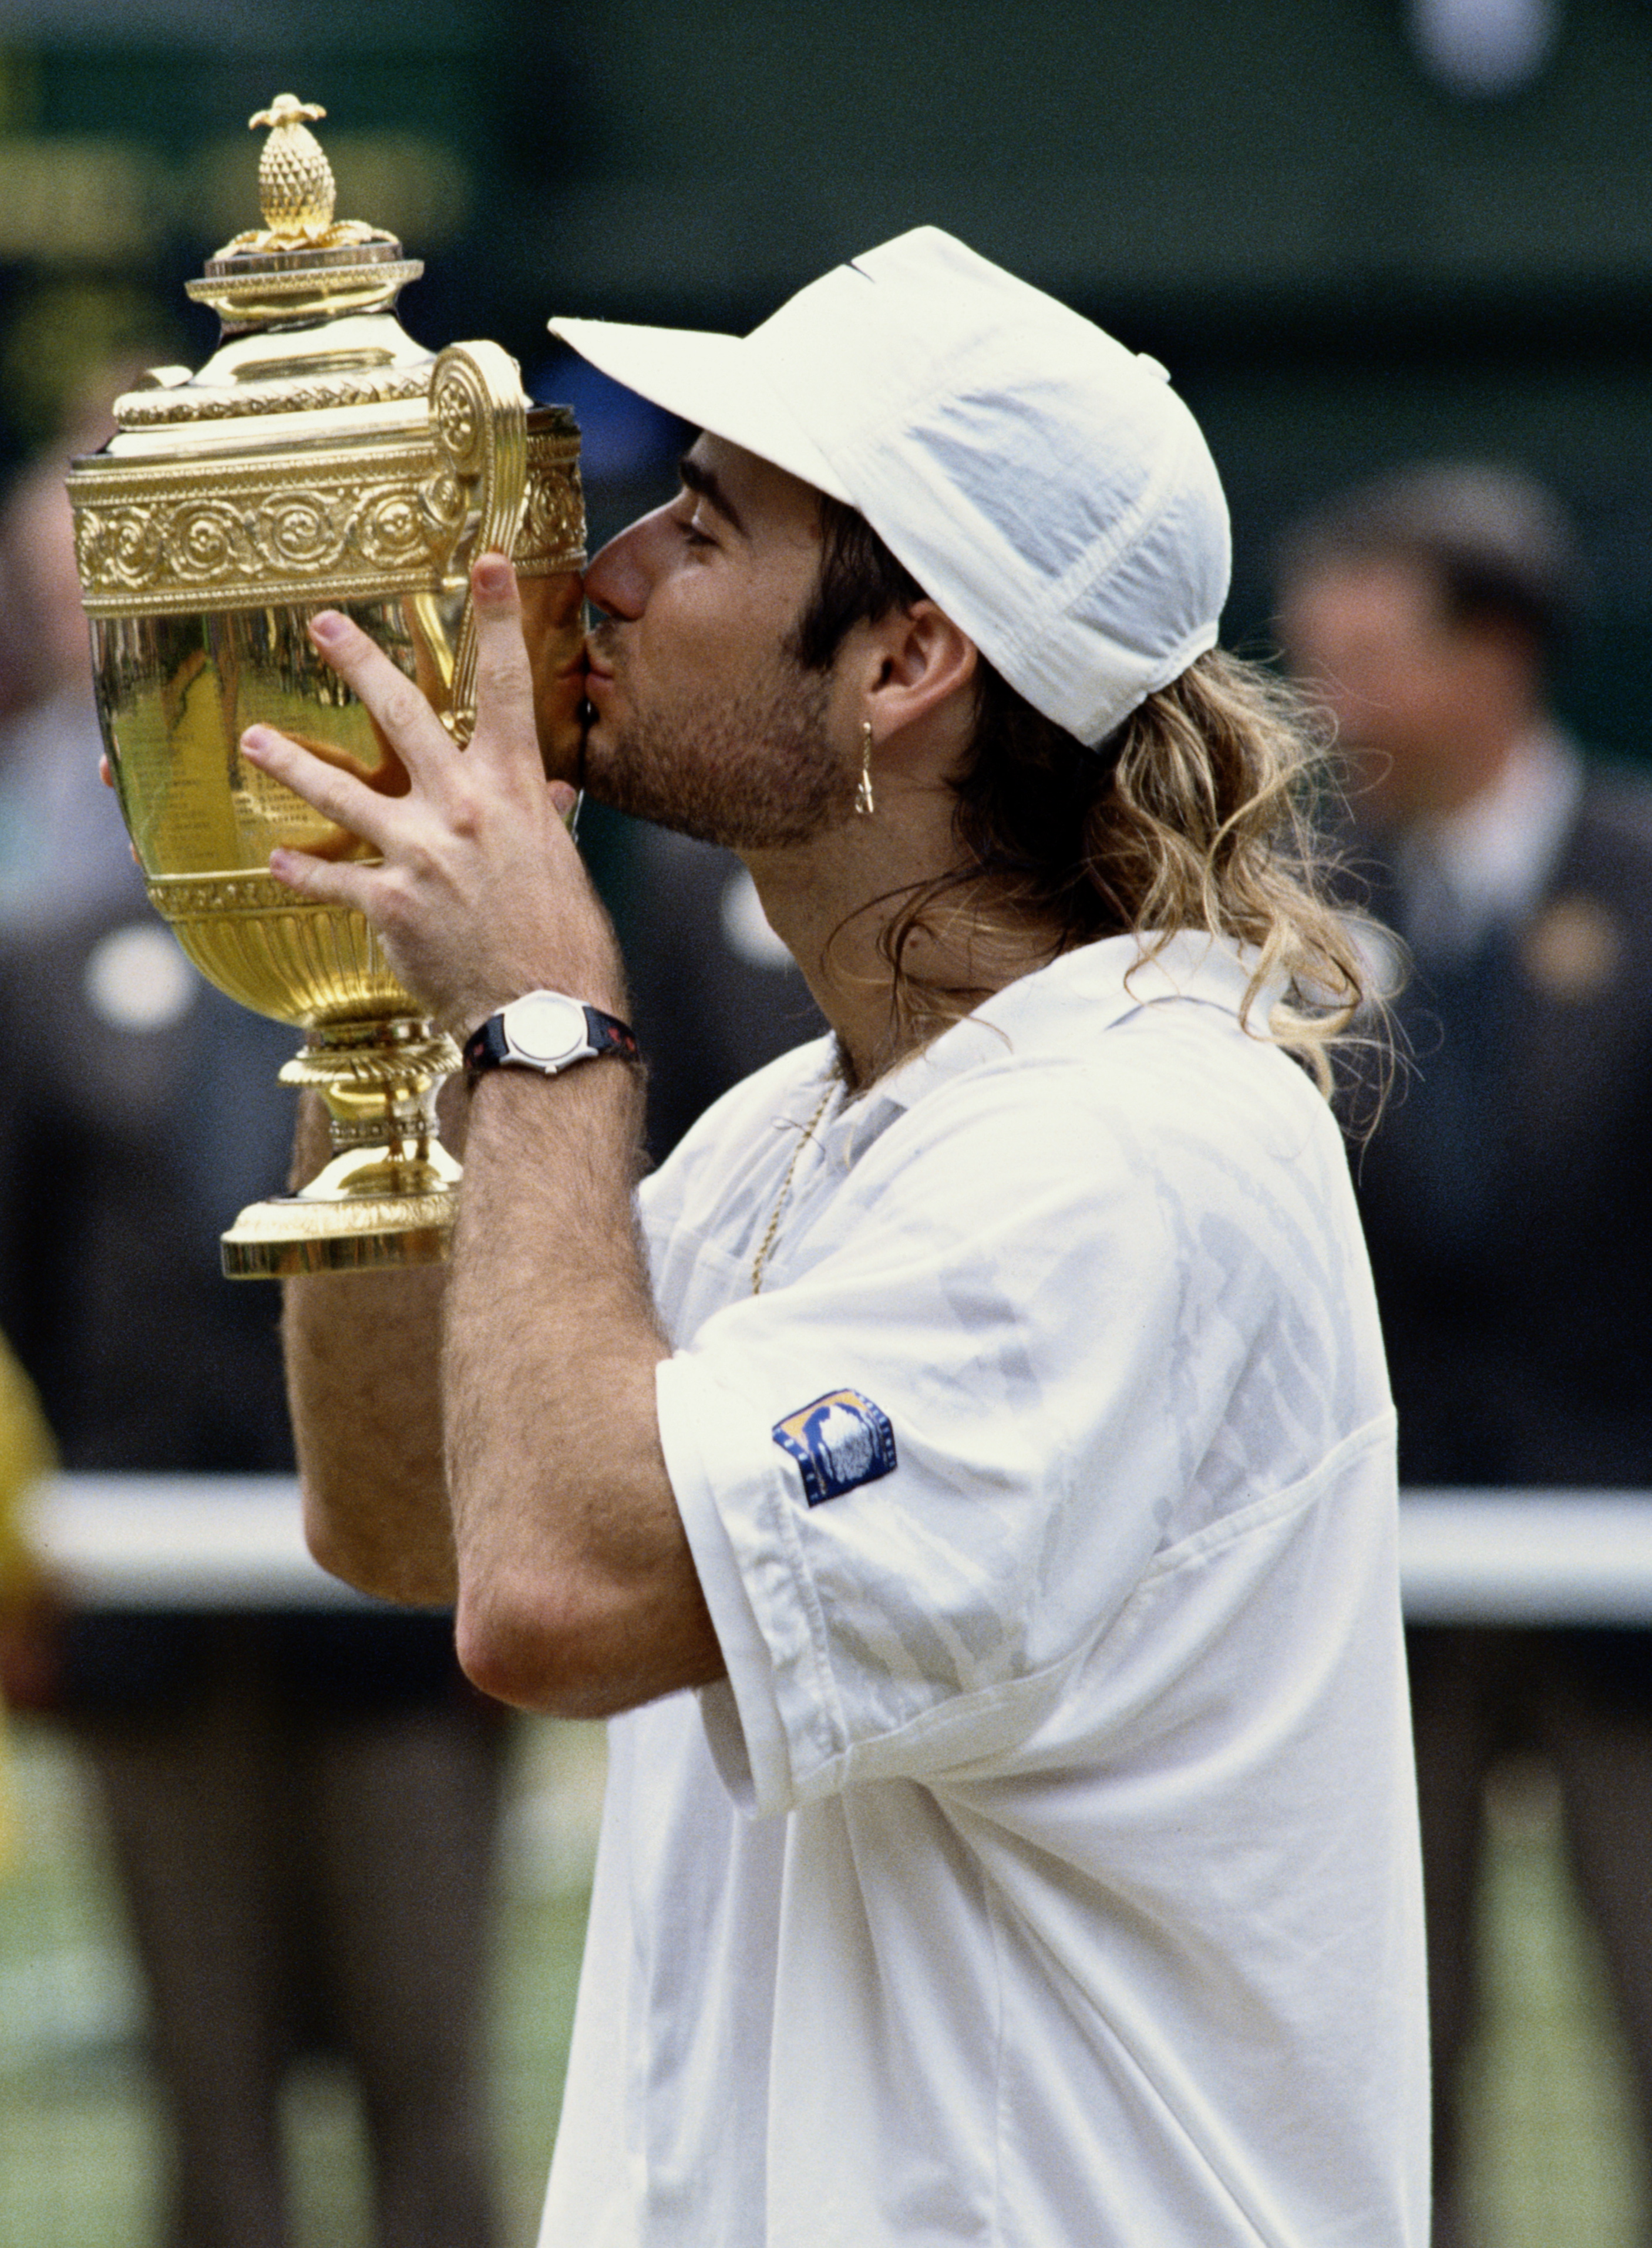 Andre Agassi of the United States kisses the trophy after his  67 (810), 64, 64, 16, 64 victory over Goran Ivanisevicin the Men's Singles Final at the Wimbledon Lawn Tennis Championships on 5th July 1992 at the All England Lawn Tennis and Croquet Cl